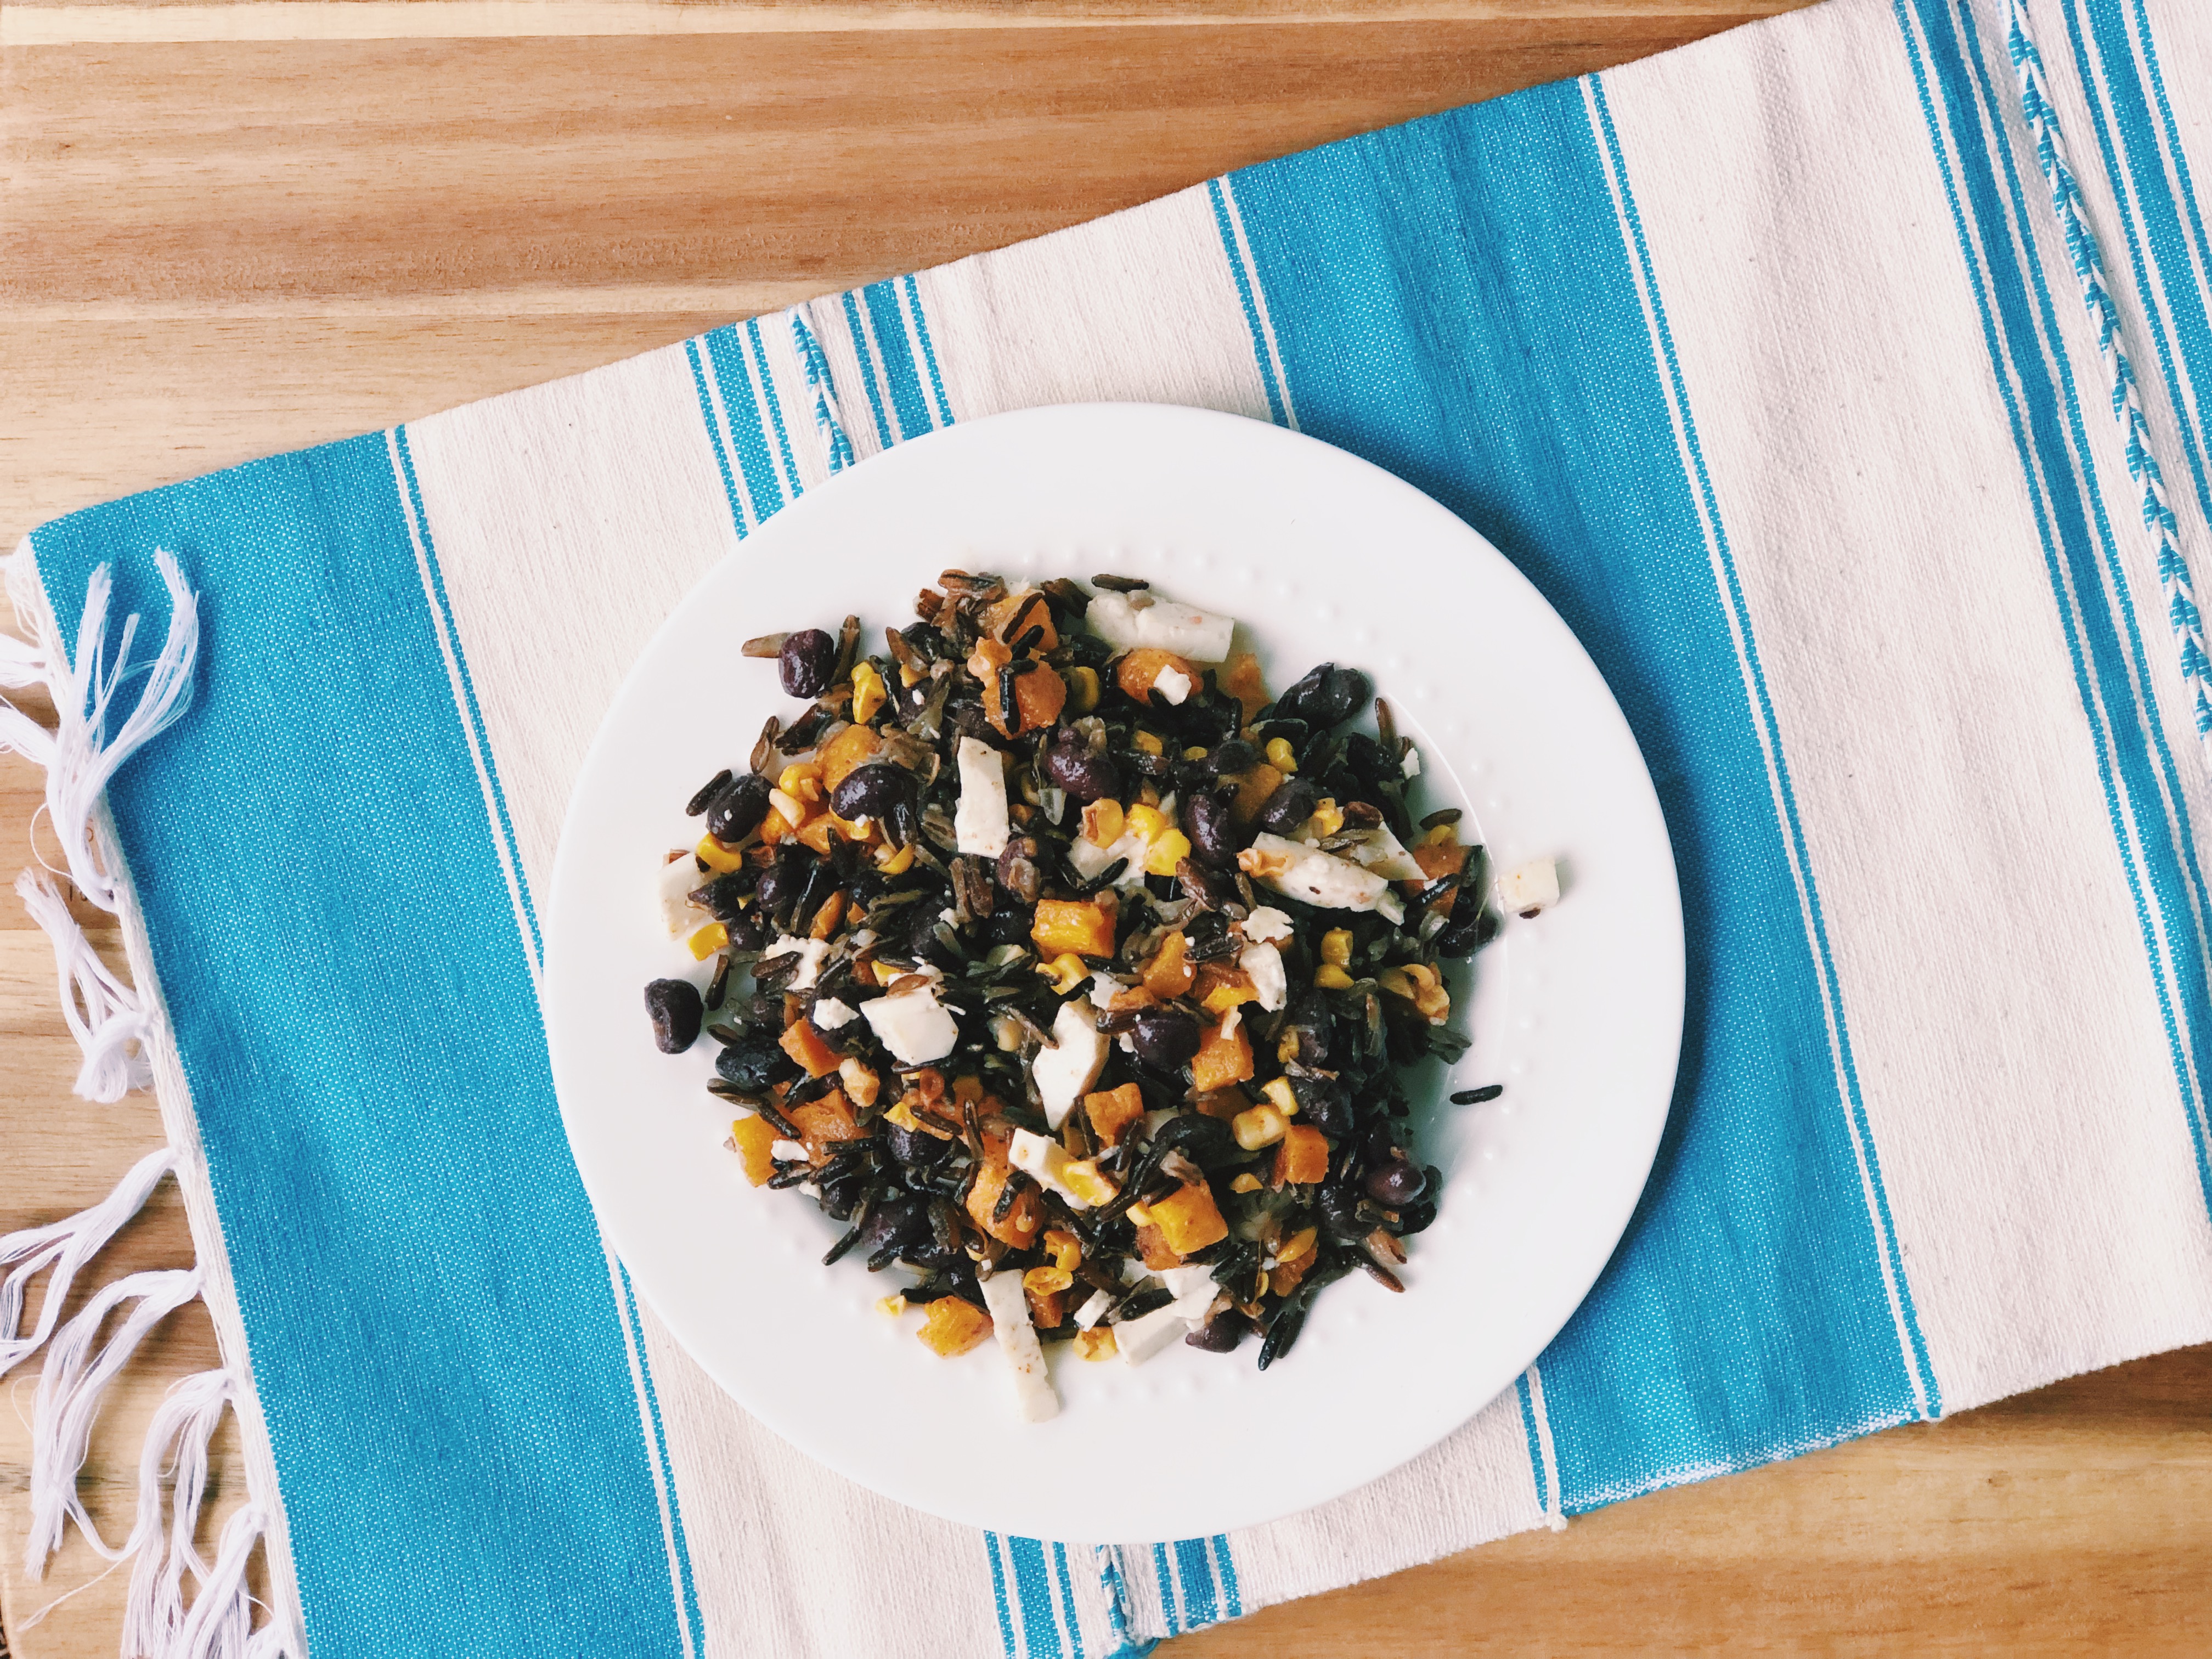 Wild rice salad with corn, butternut squash, and black beans